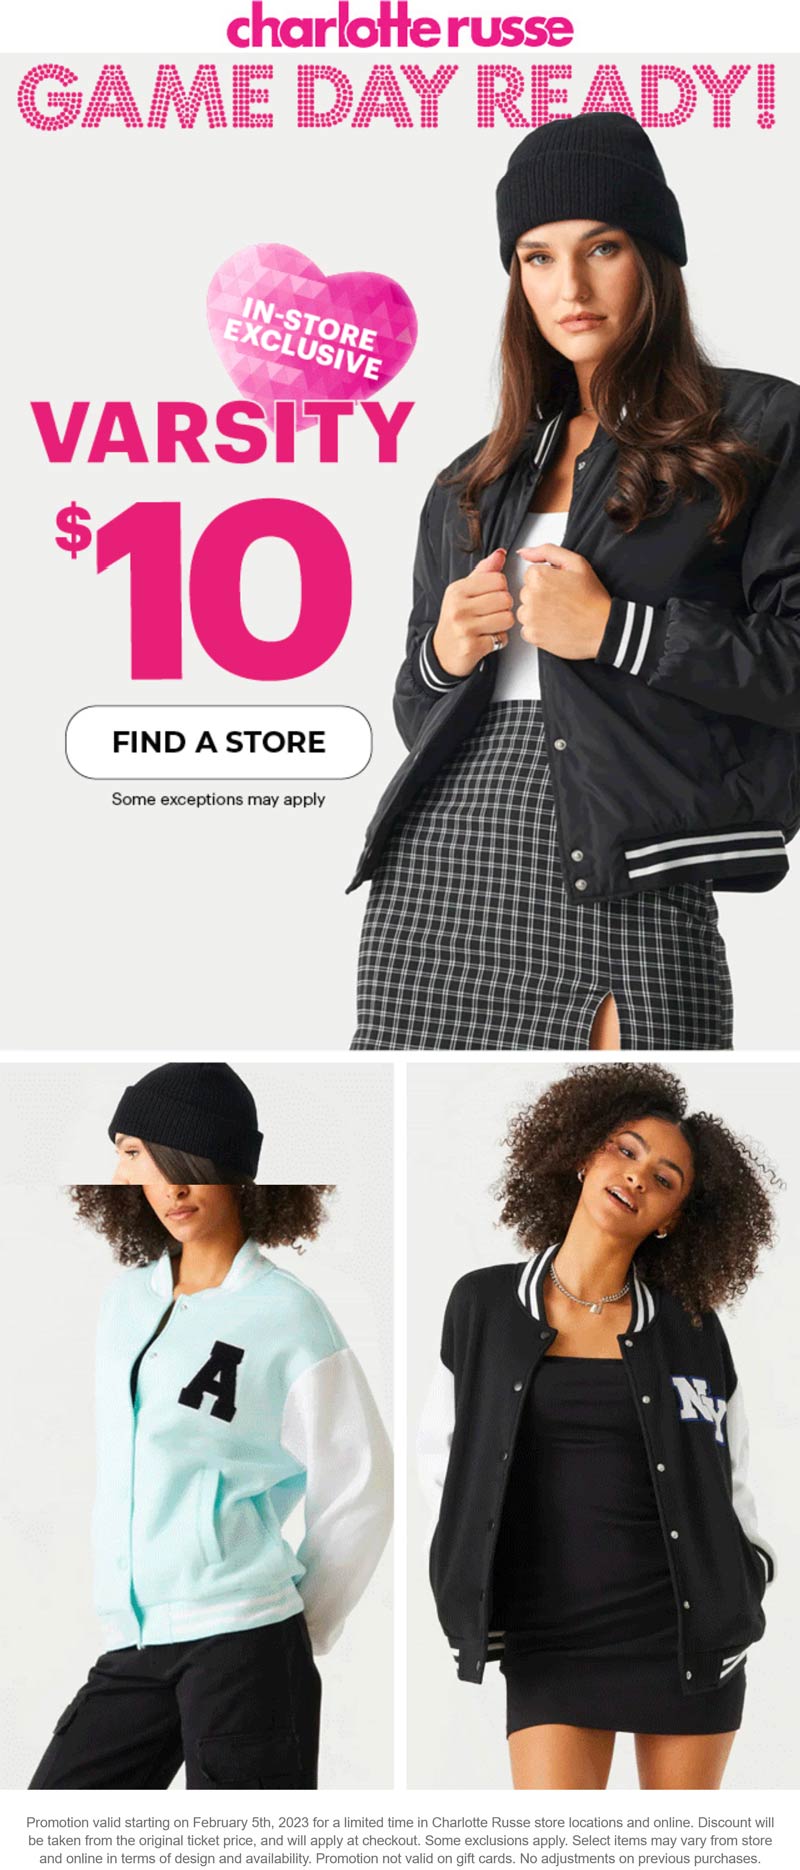 Charlotte Russe stores Coupon  $10 varsity jackets at Charlotte Russe #charlotterusse 